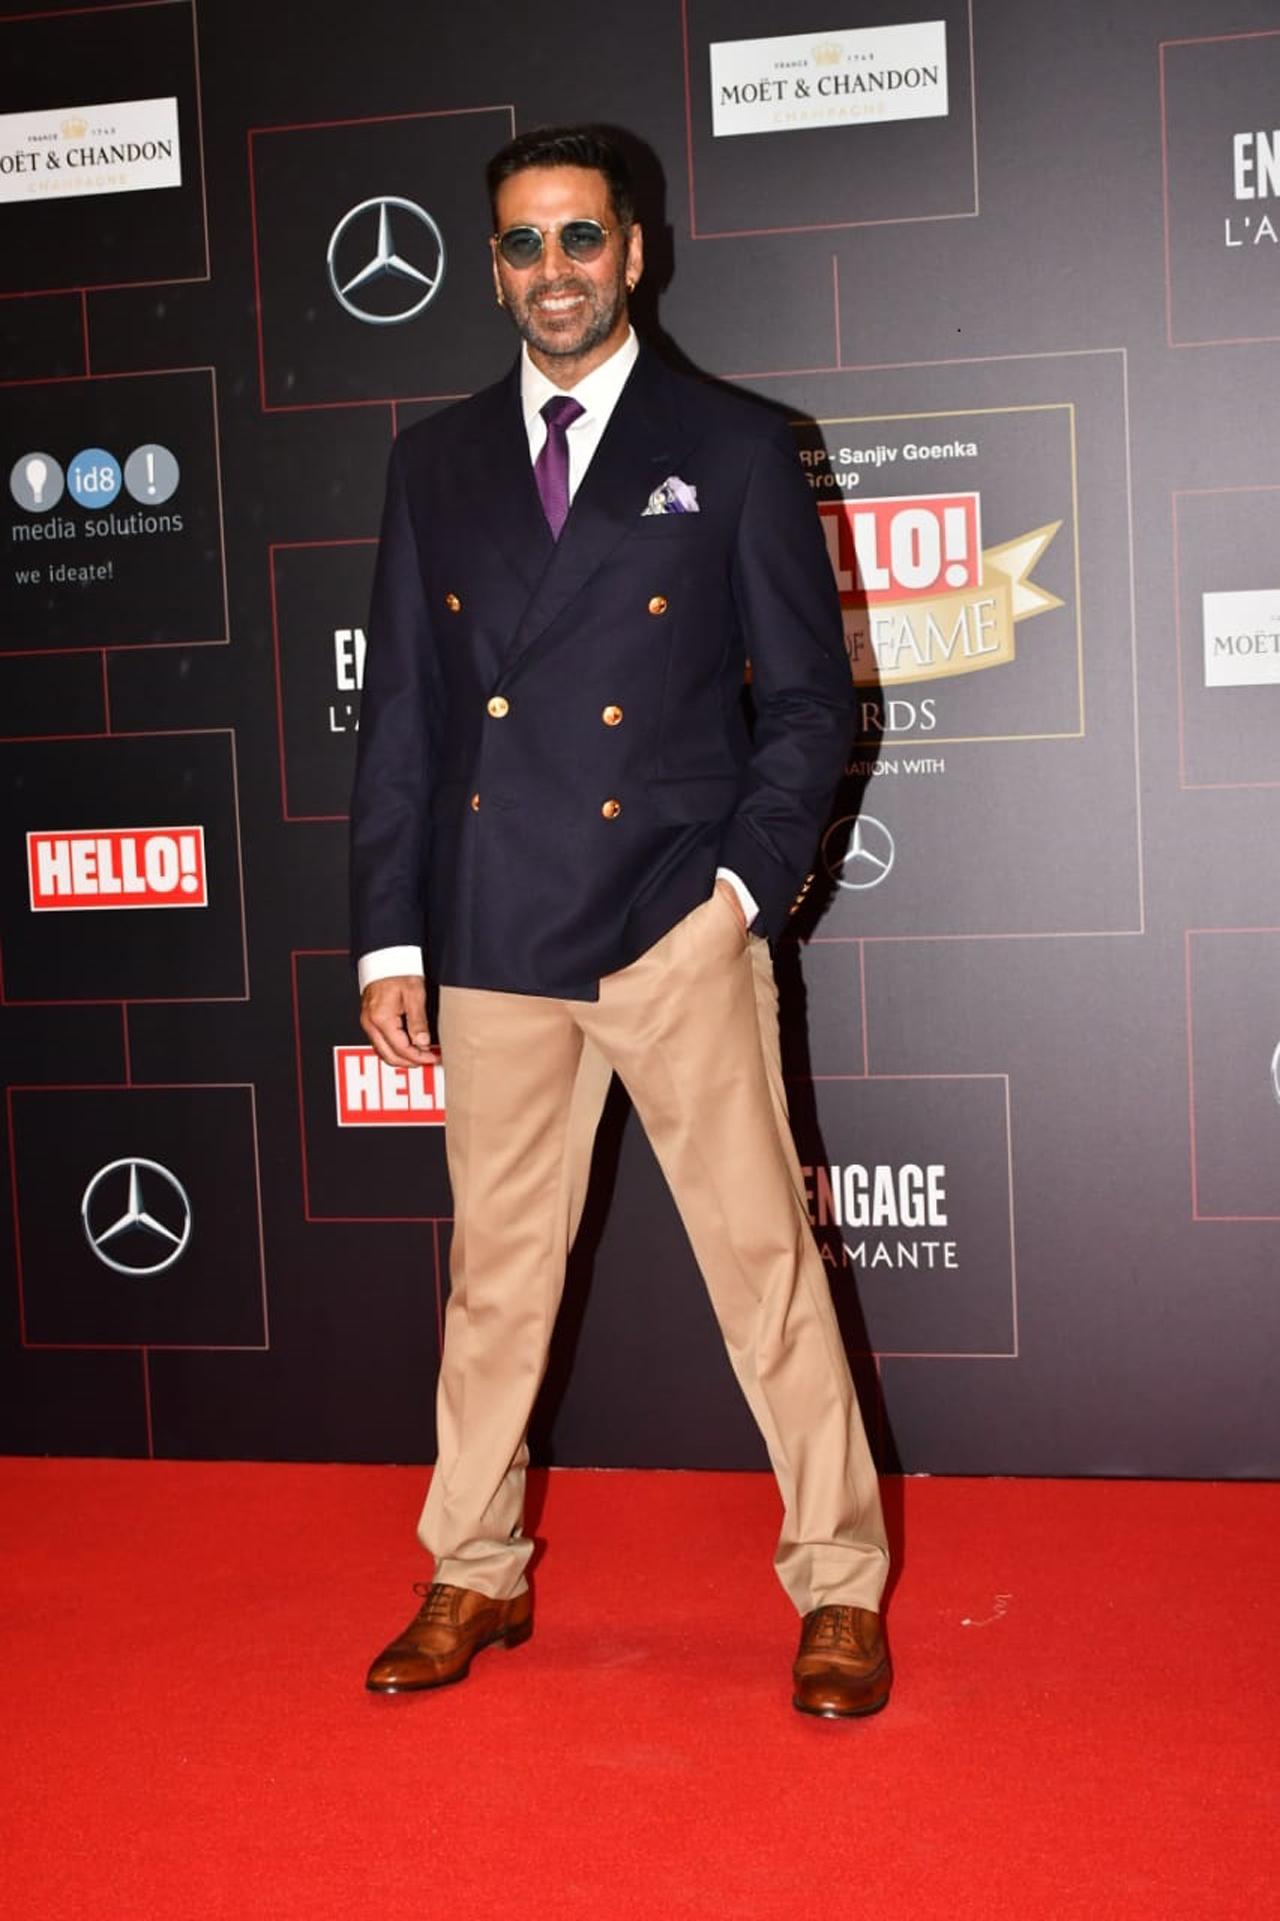 Akshay Kumar showed off his uber-cool side as he suited up for the event.